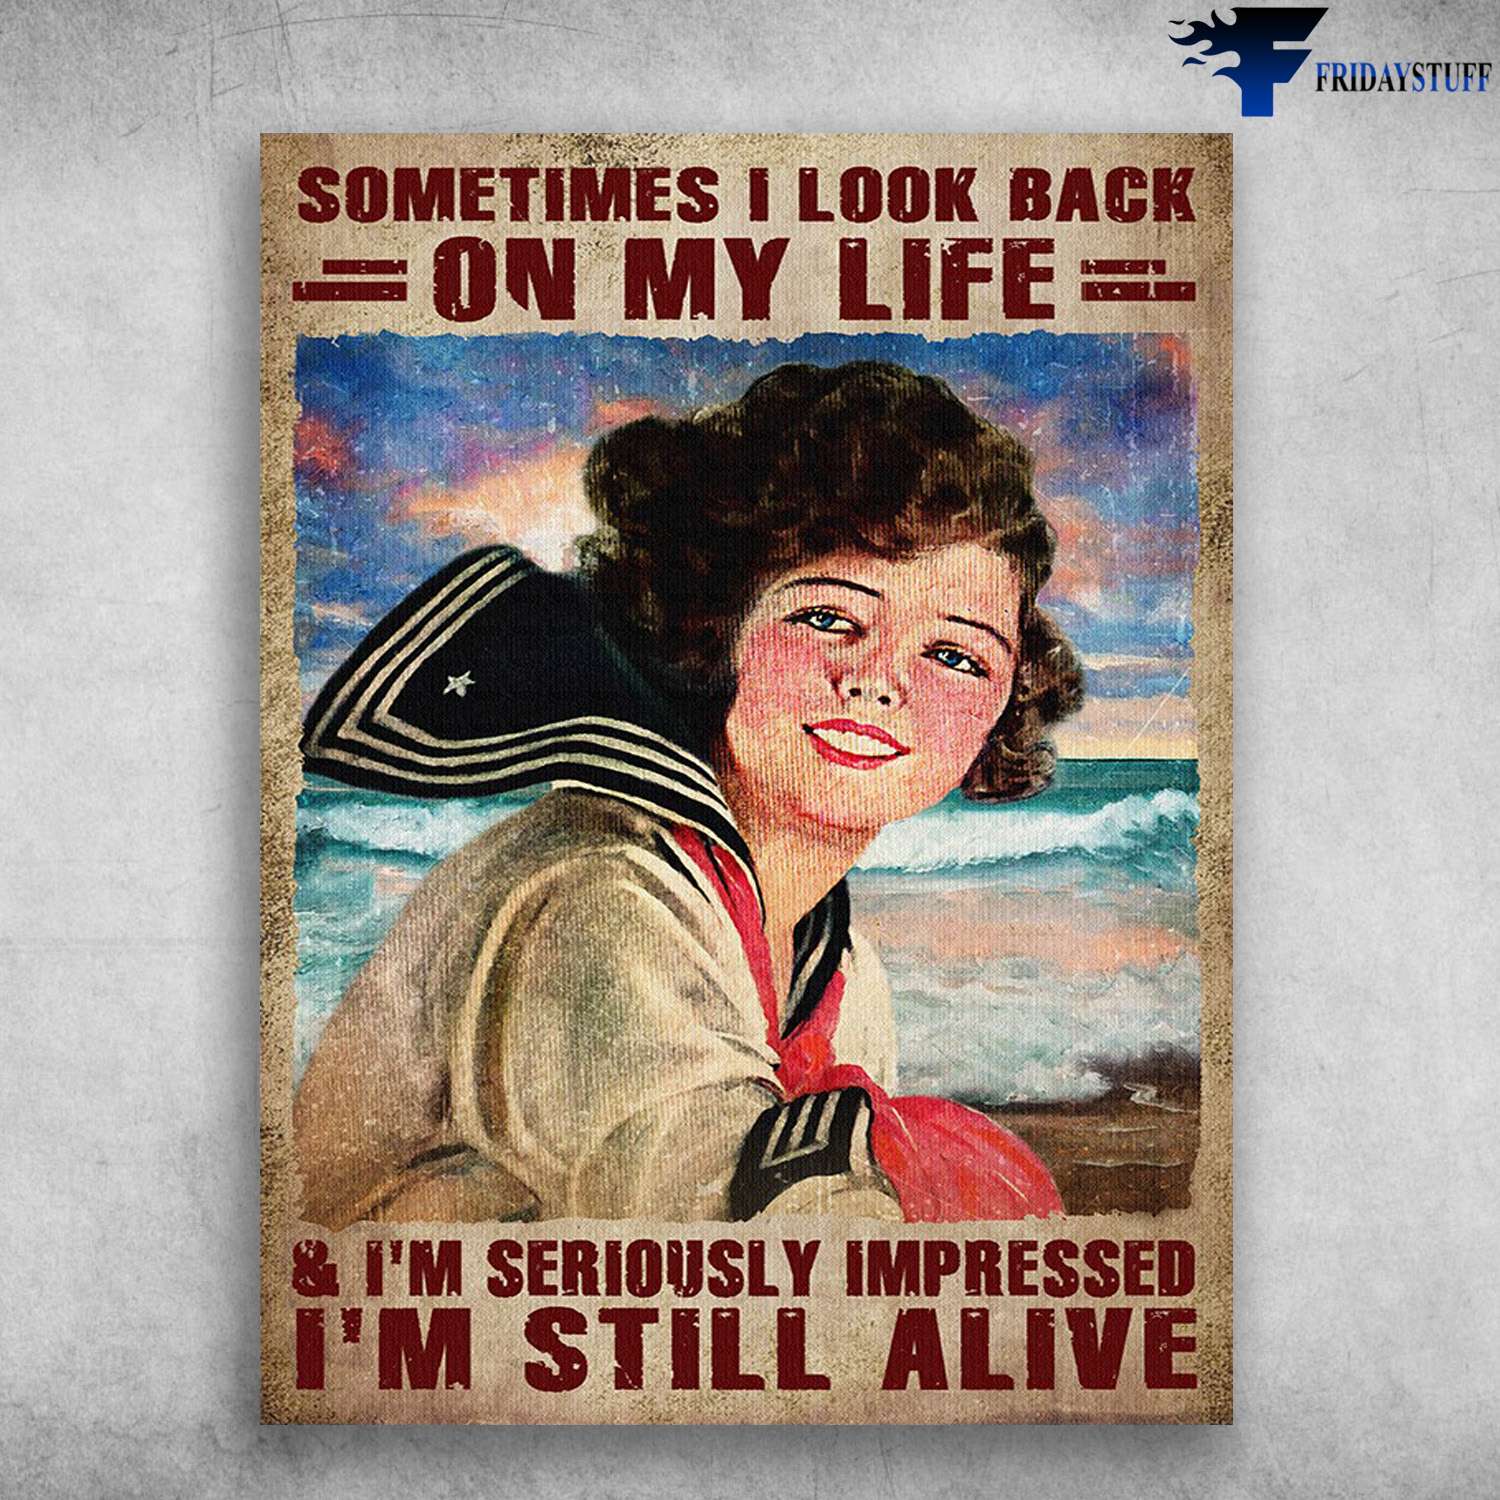 Sailor Poster, Female Sailor - Sometimes I Look Back, On My Life, And I'm Seriously Impressed, I'm Still Alive